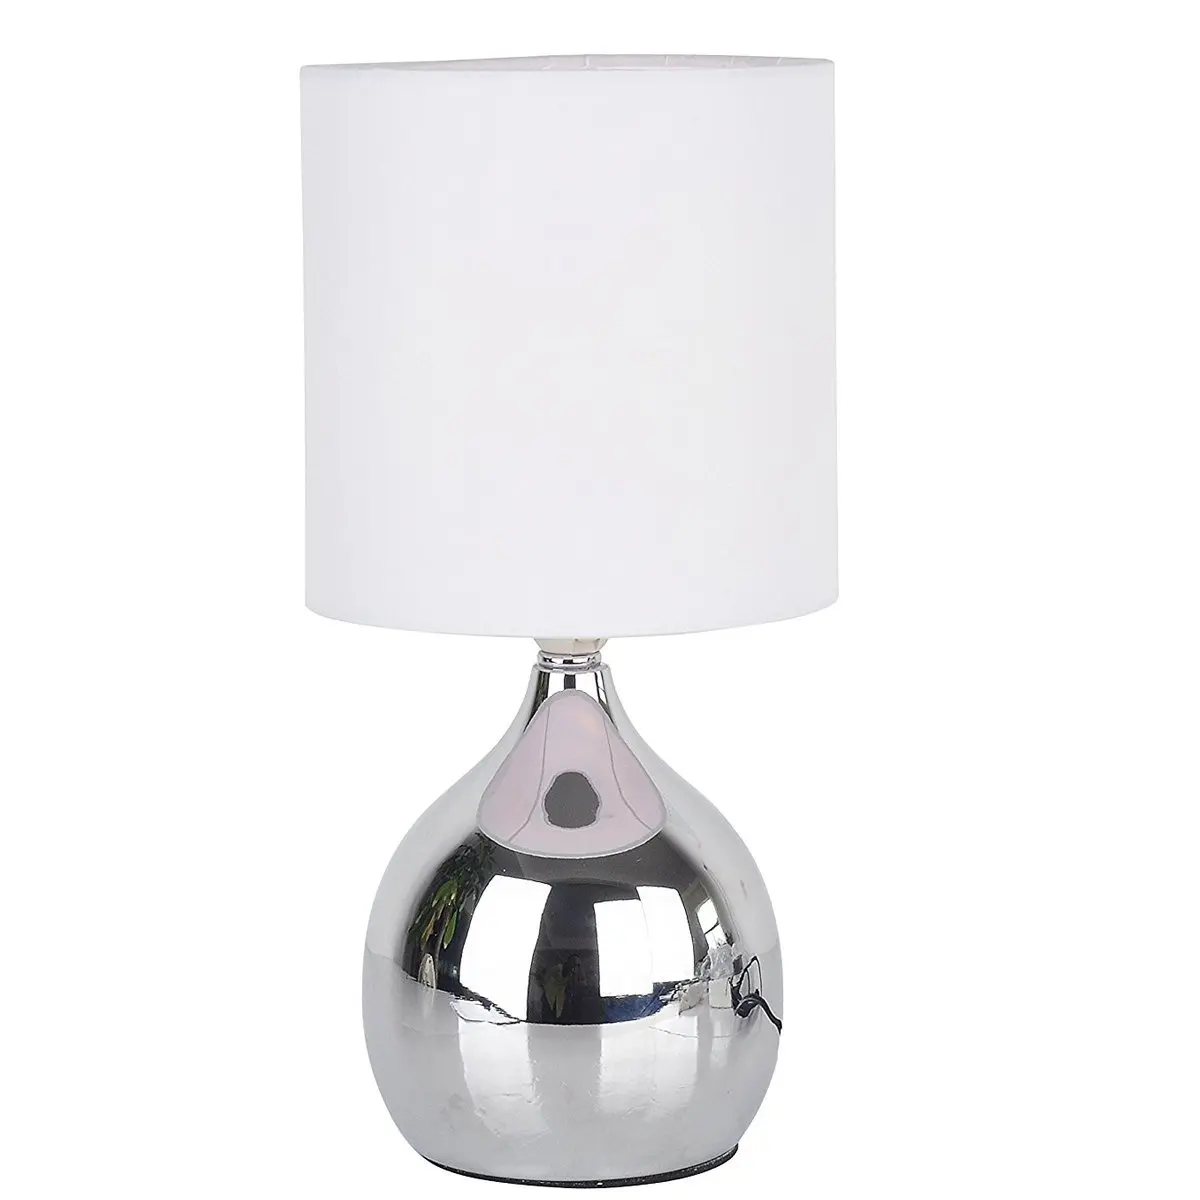 Cheap Touch Lamps Lowes Find Touch Lamps Lowes Deals On Line At